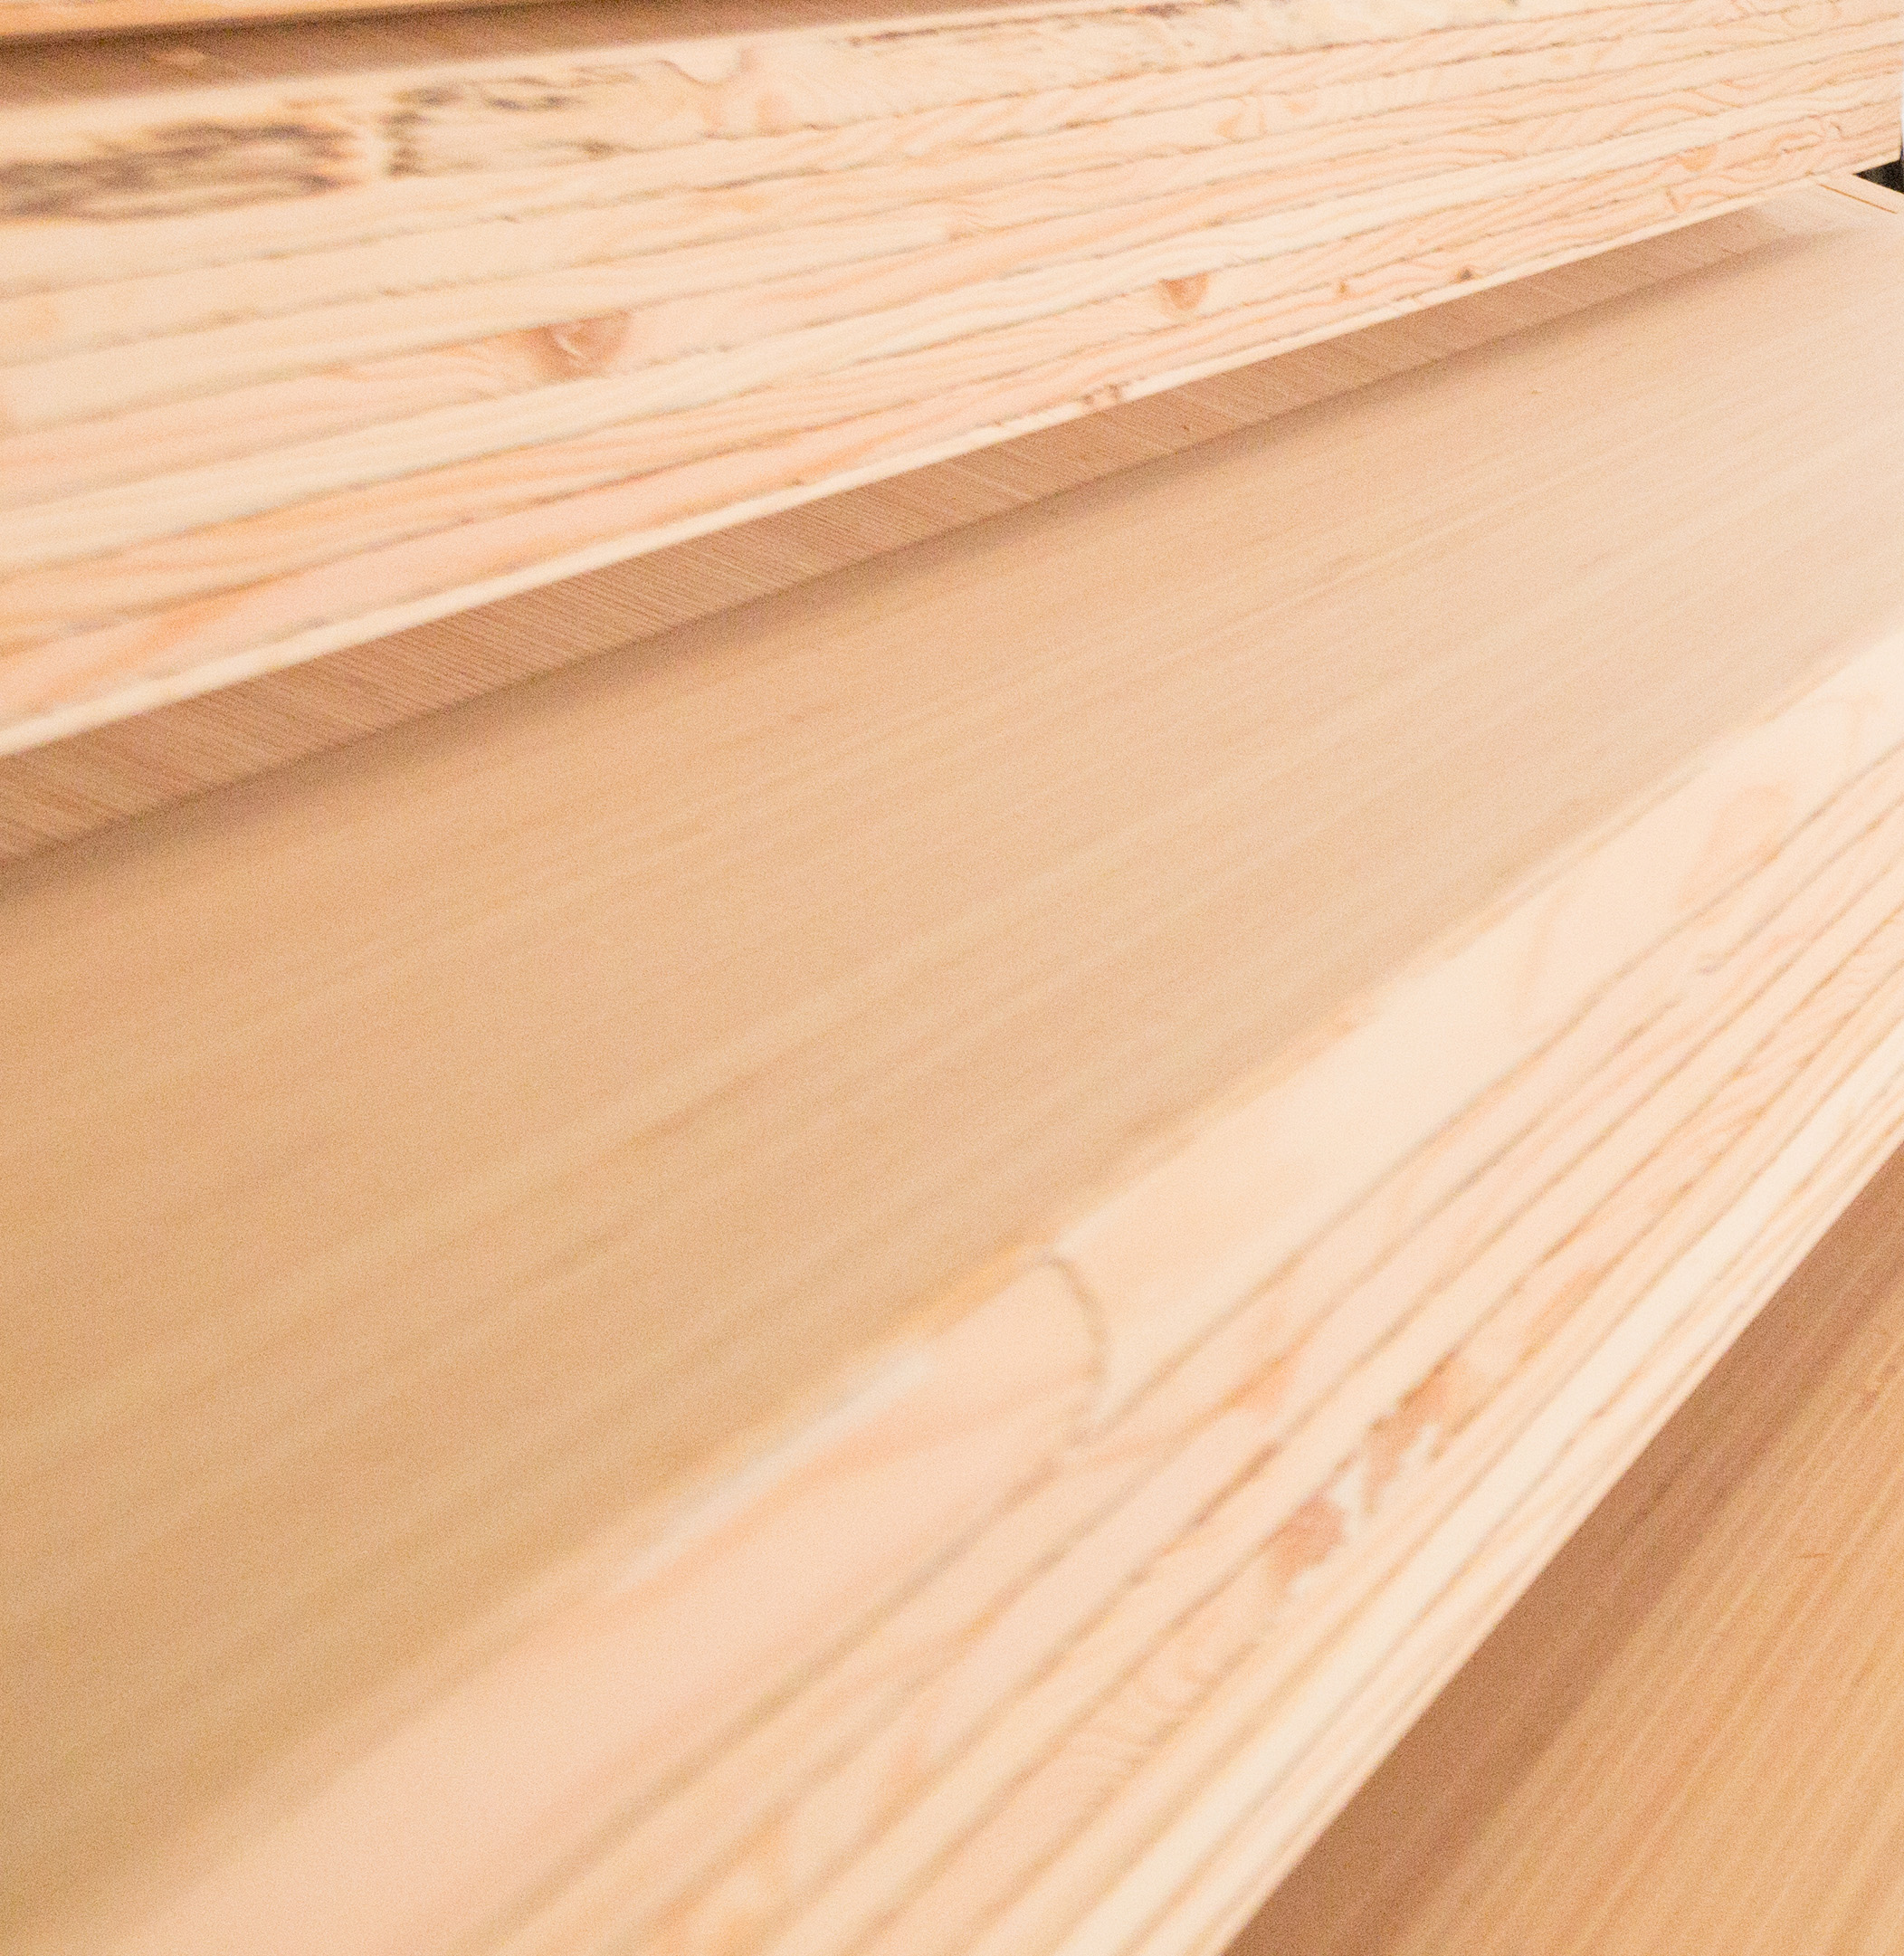 Close up view of Laminated veneer lumber (LVL), one of several different mass timber products made in BC, while being manufactured